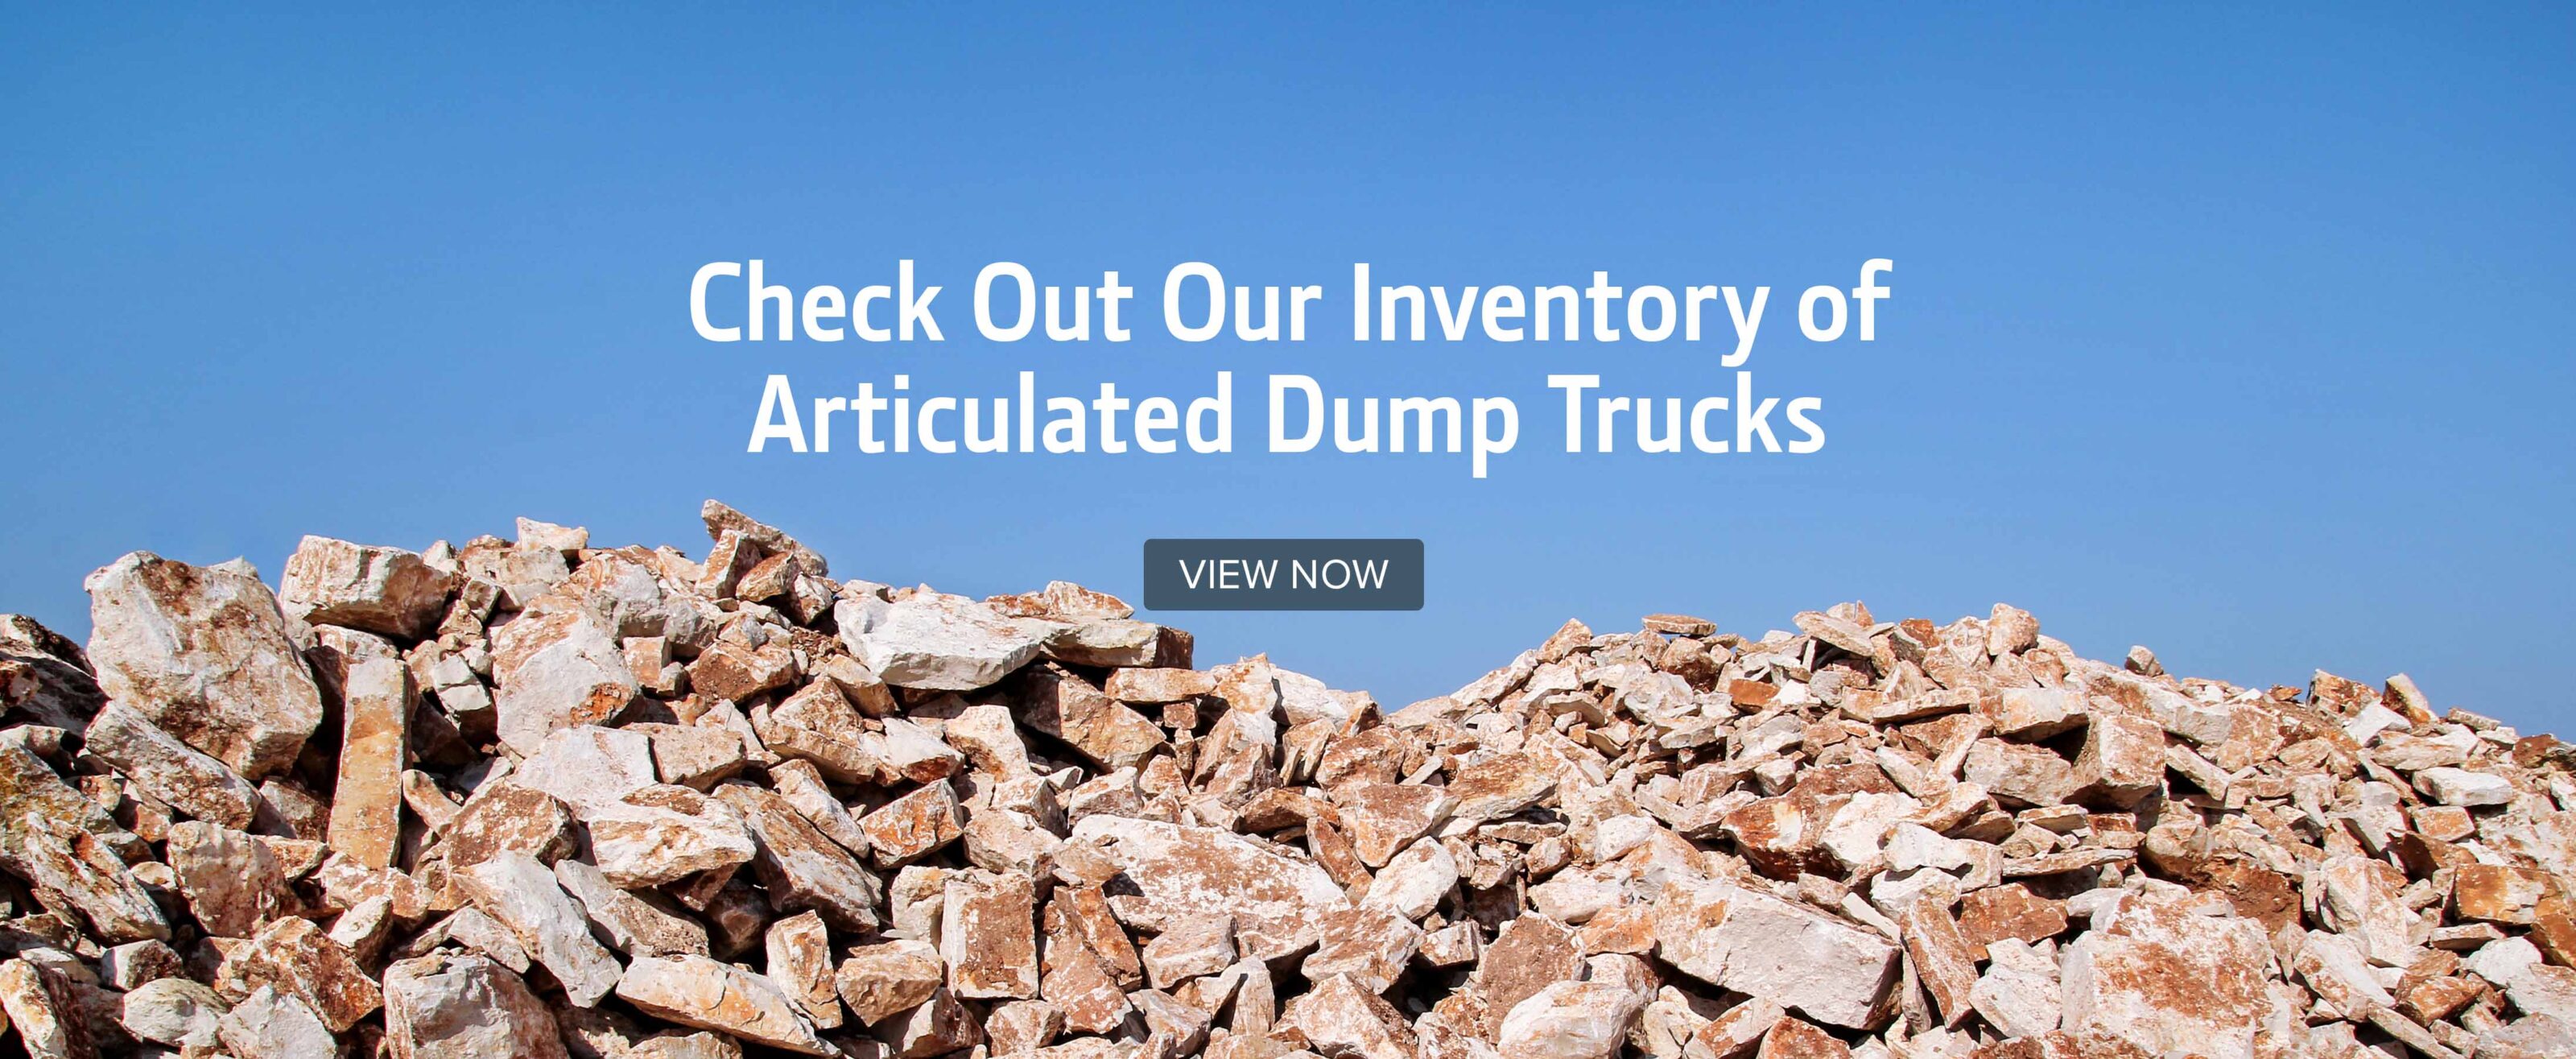 Check Out Our Inventory of Articulated Dump Trucks